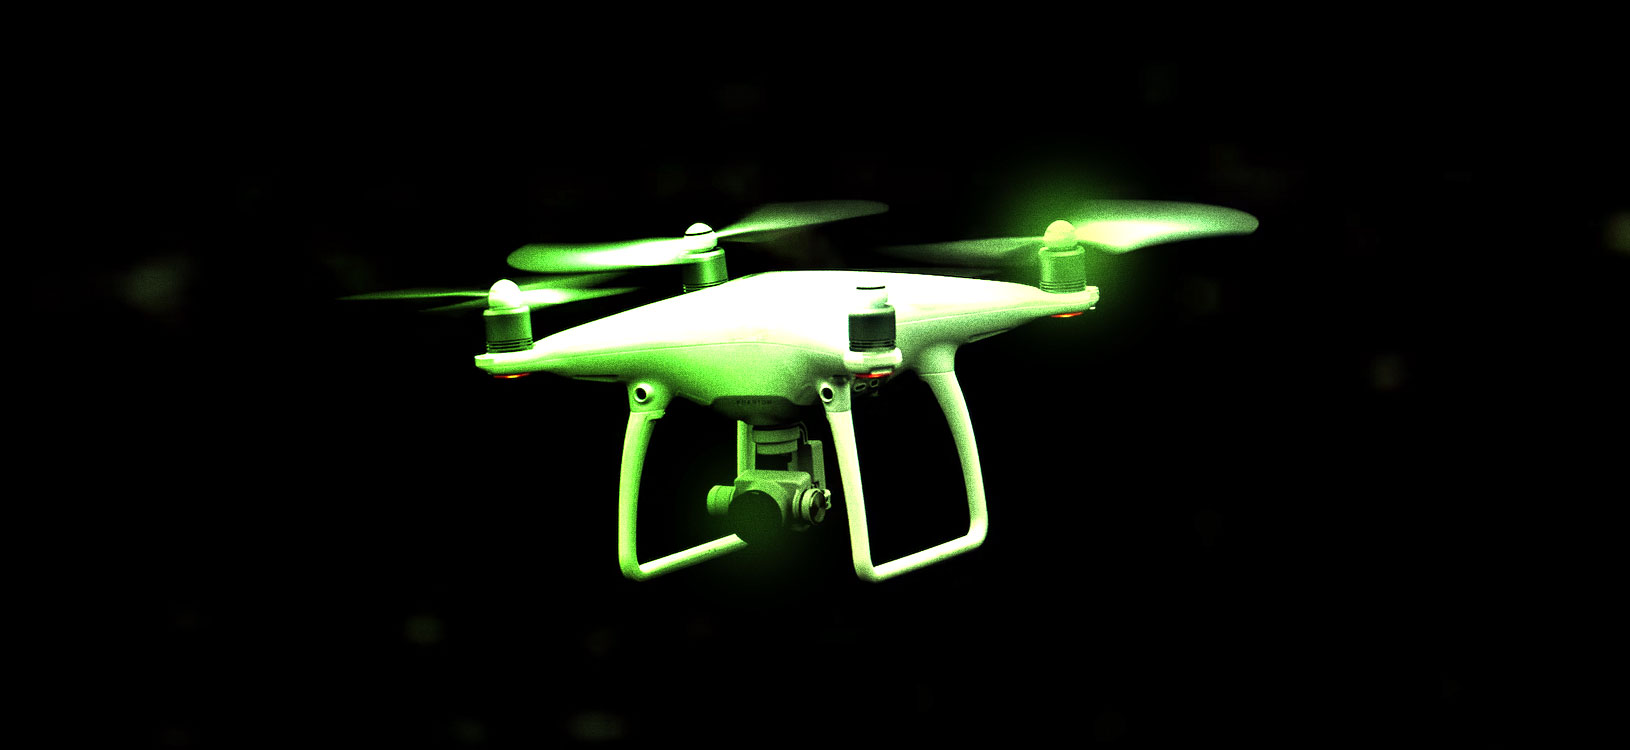 Night vision devices on modern drones